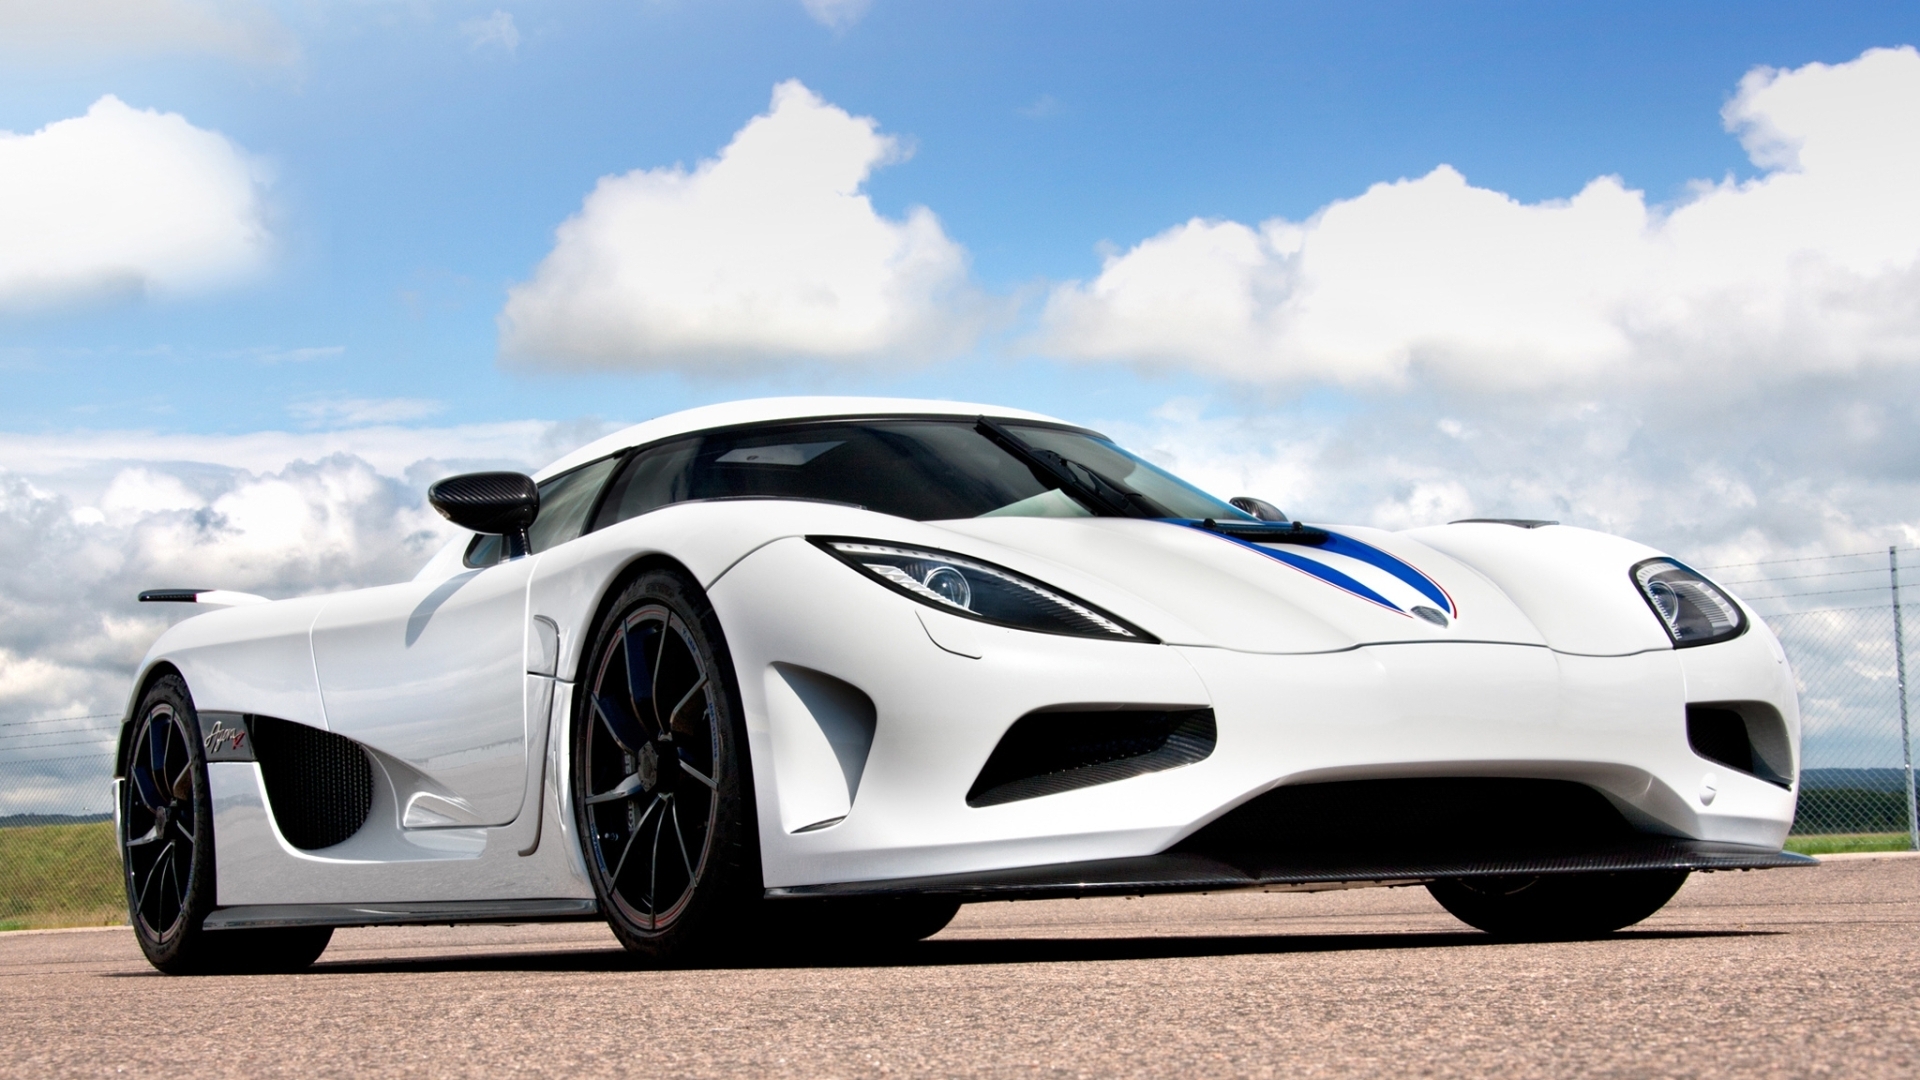 11 Volvo Koenigsegg computer wallpaper fire there are numerous from 2008-2021 